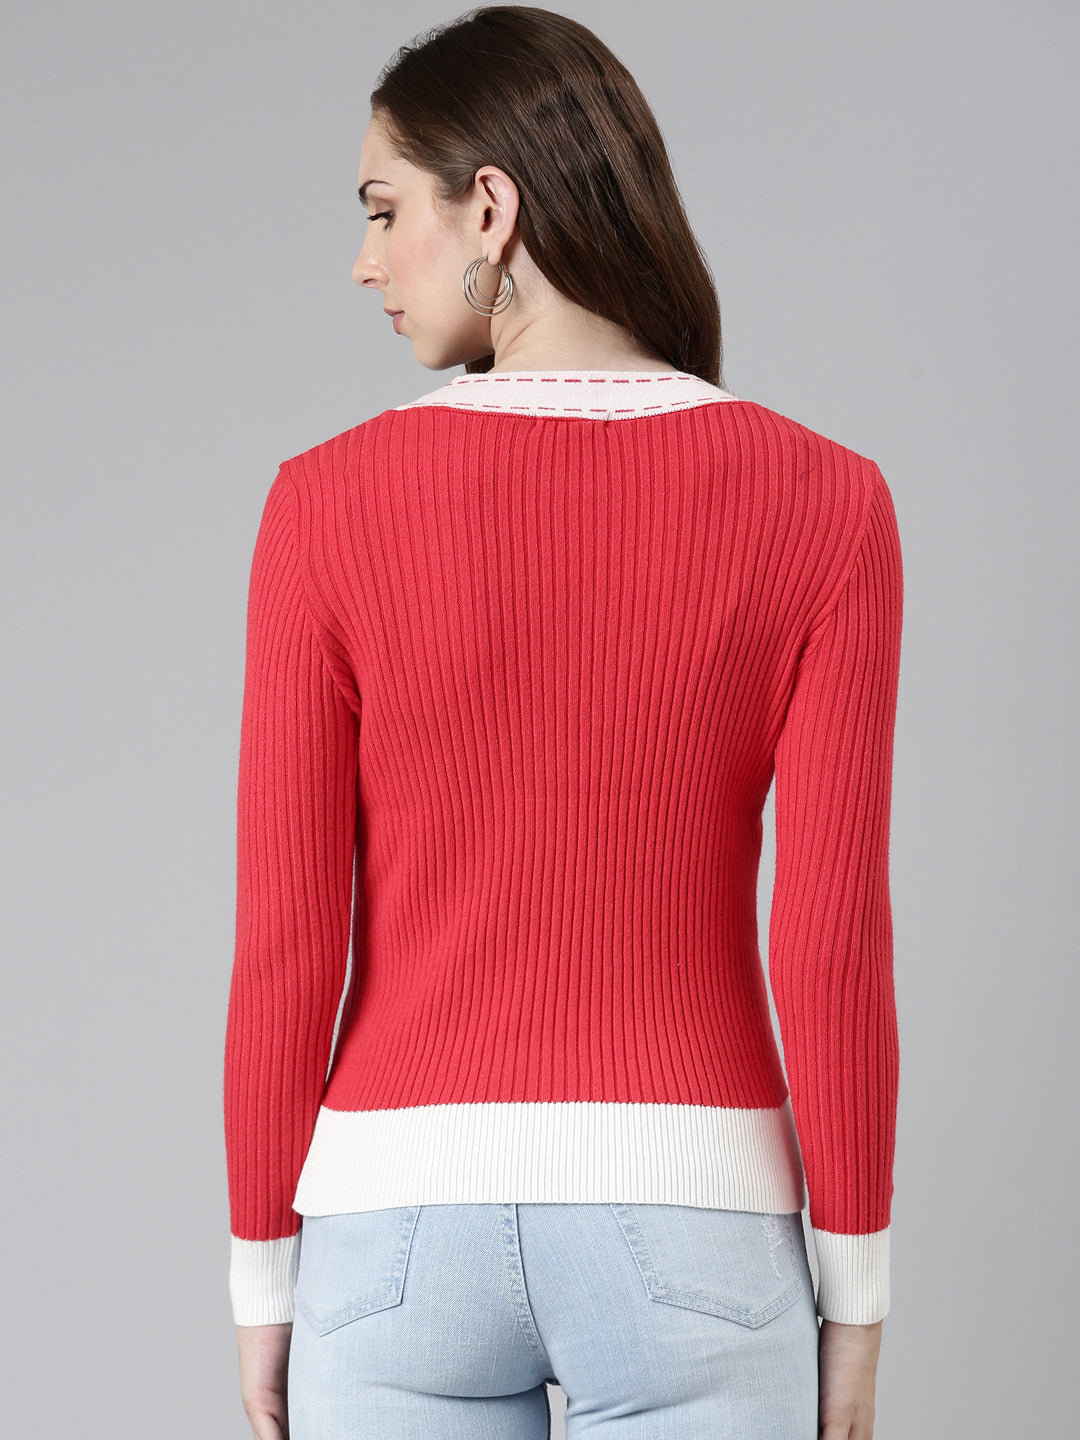 Women Coral Solid Vest Sweater